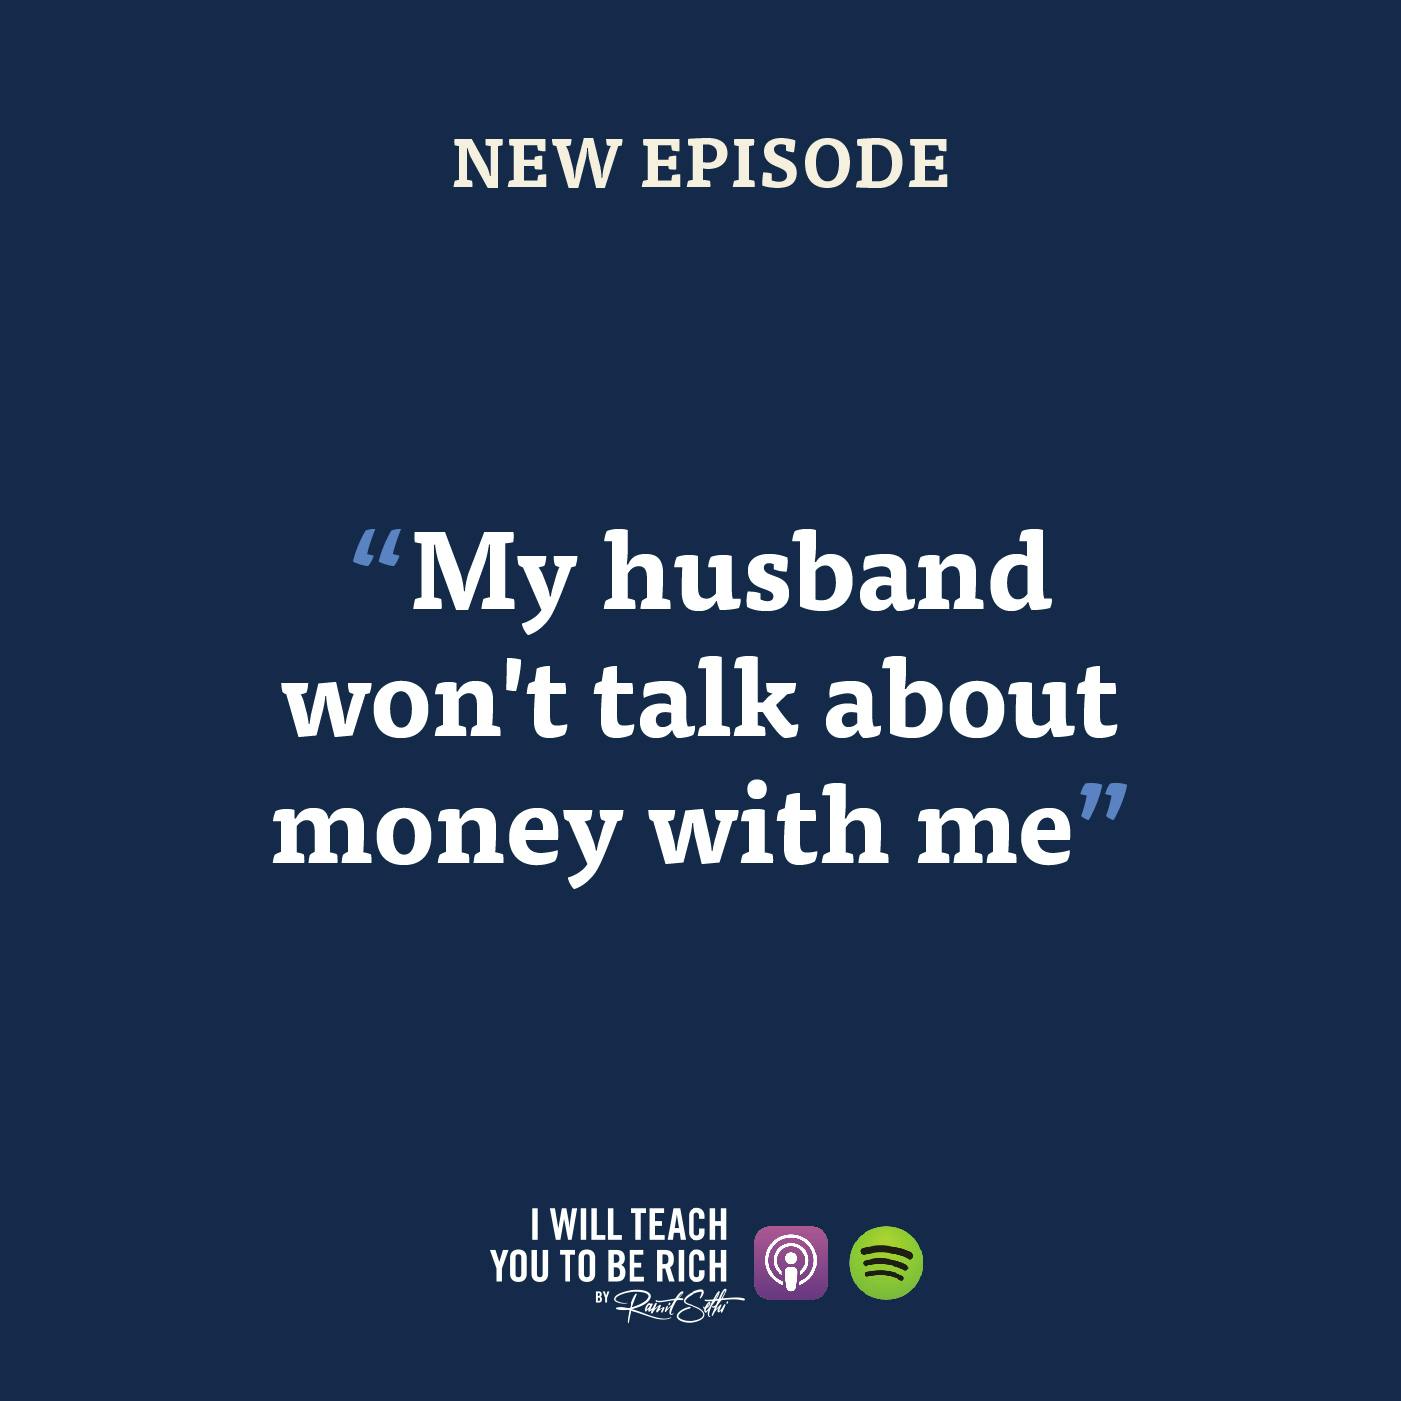 12. ”My husband won’t talk about money with me”